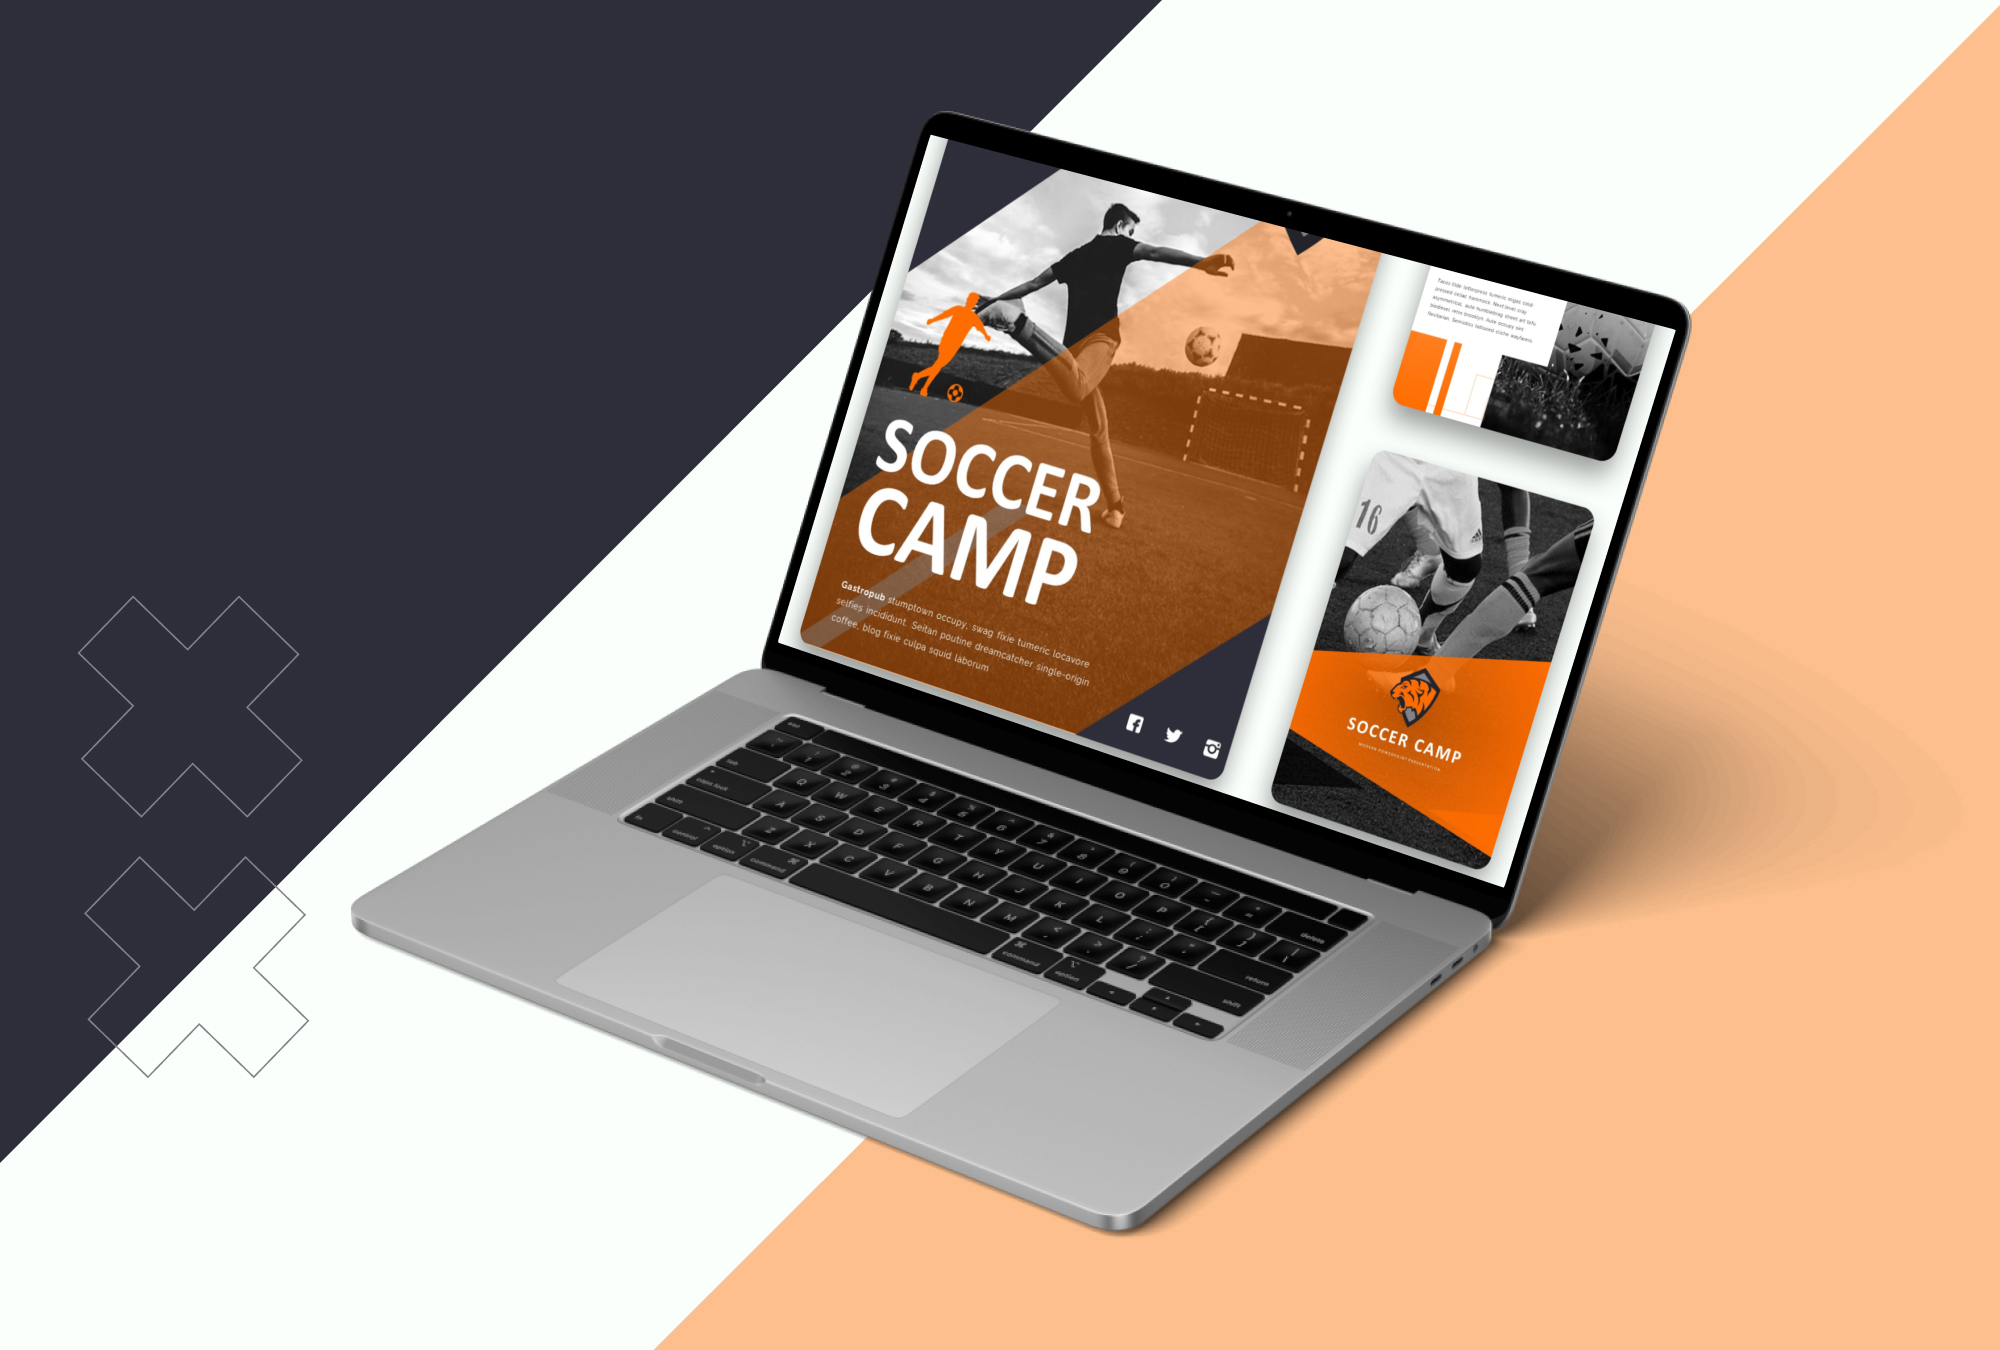 Images on screen laptop soccer camp template mockup.